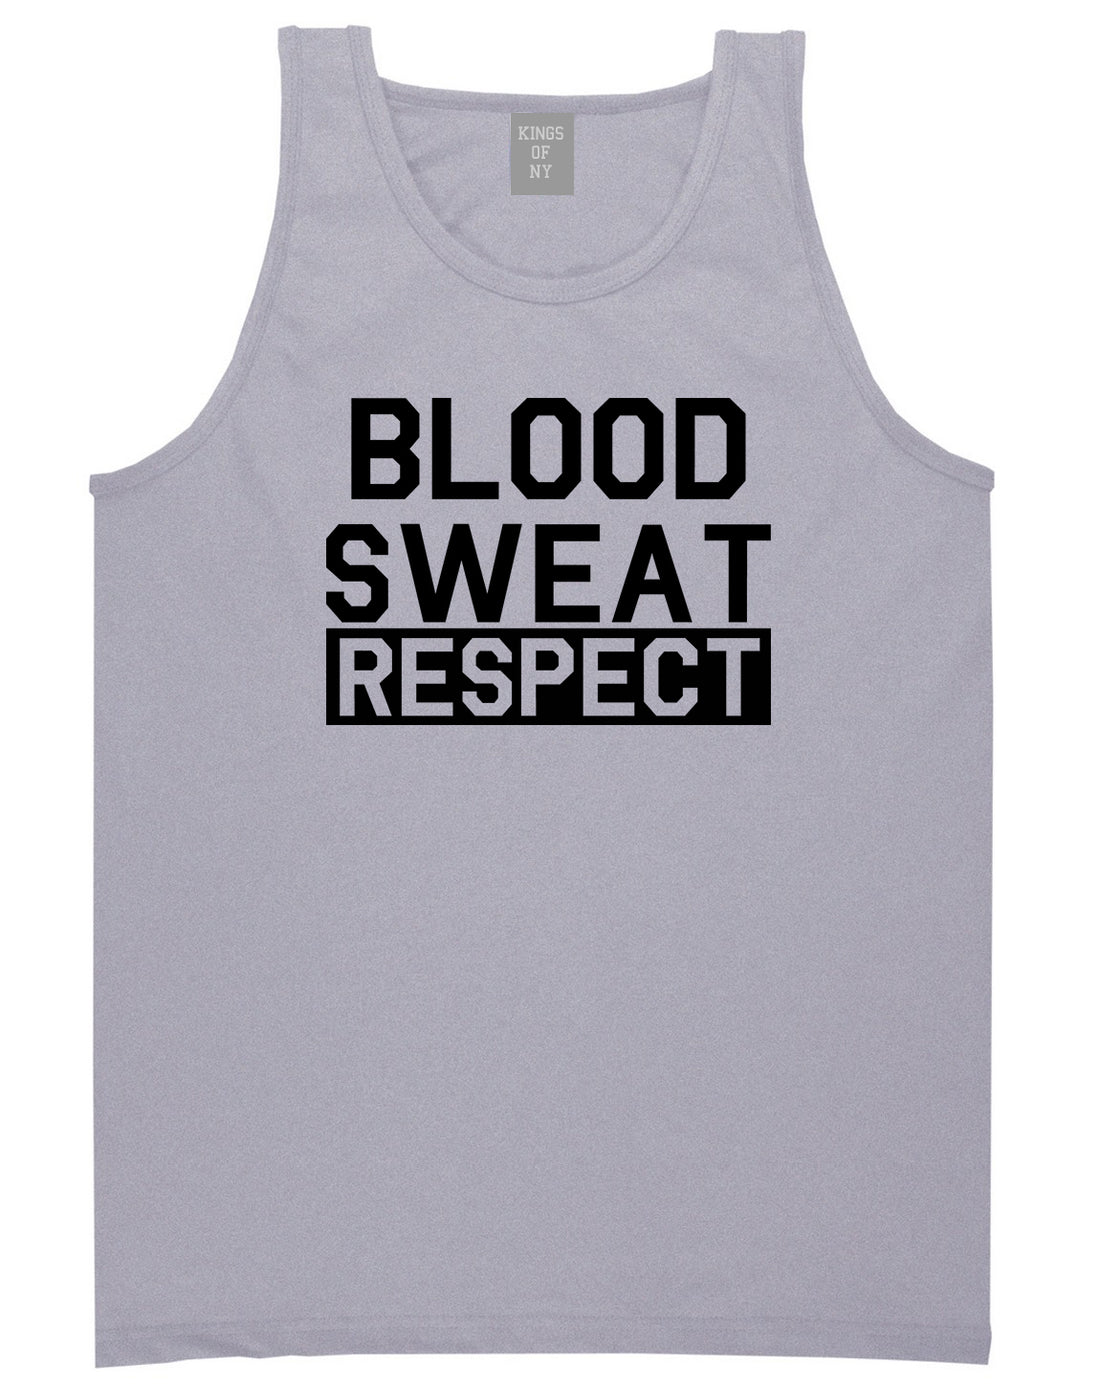 Blood Sweat Respect Gym Workout Mens Tank Top Shirt Grey by Kings Of NY